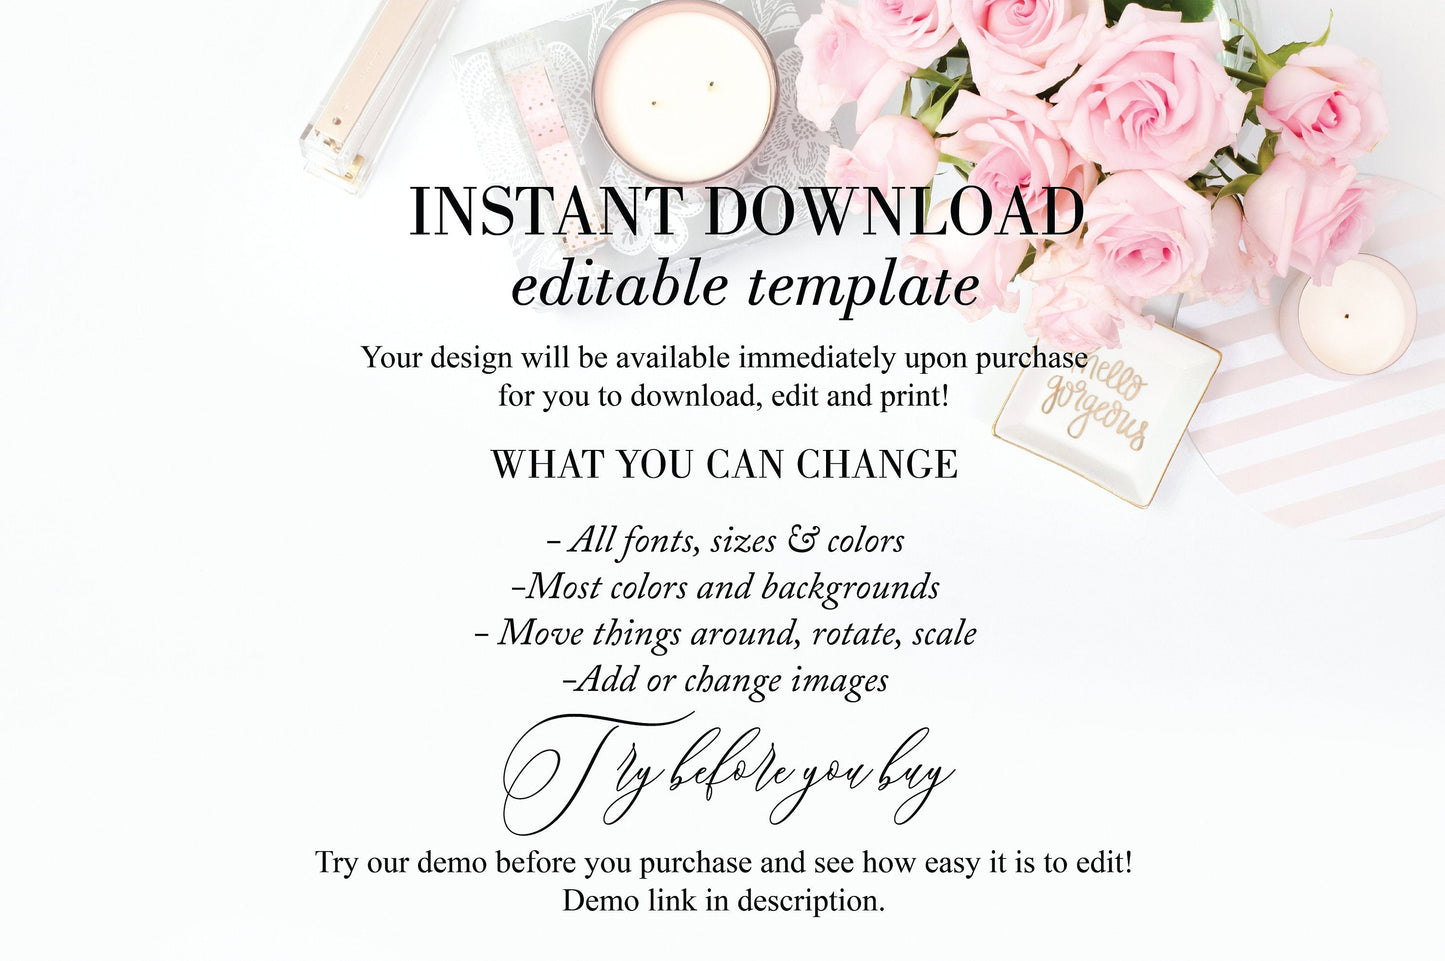 Place Card Template Templett Wedding Escort Cards Printable Place Card, Place Cards Blush Editable Wedding - Fleur PLACE CARDS SAVVY PAPER CO